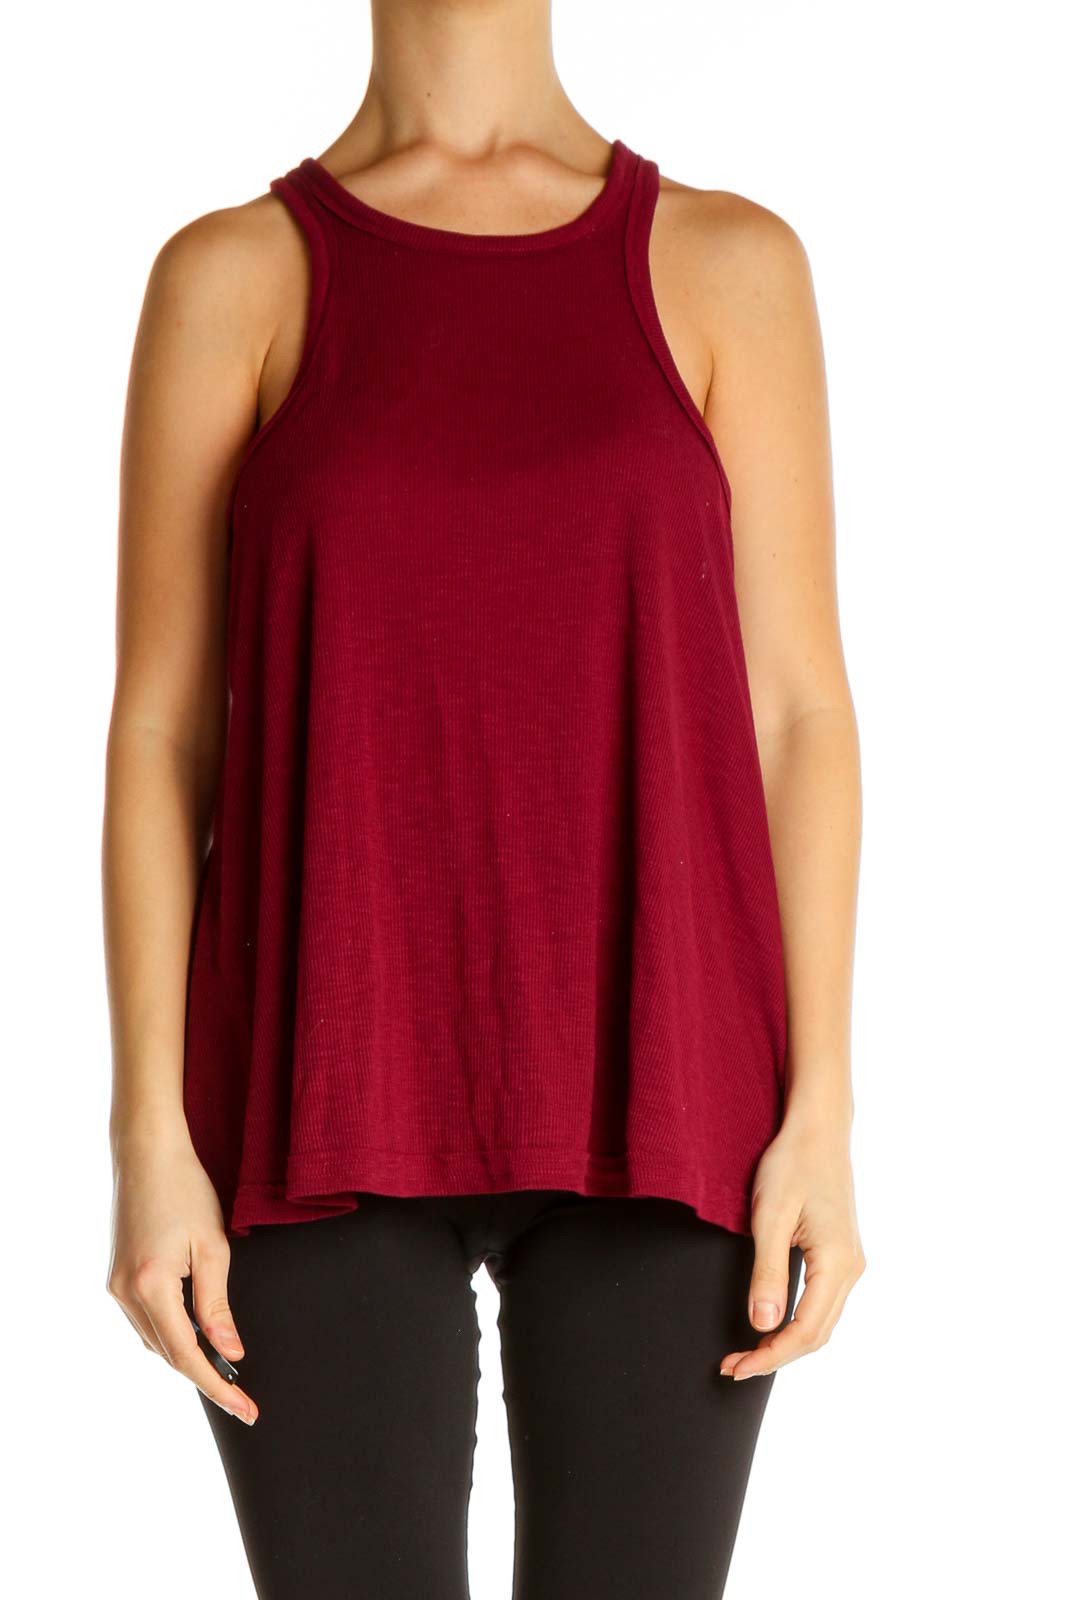 Red Solid Casual Tank Top Front